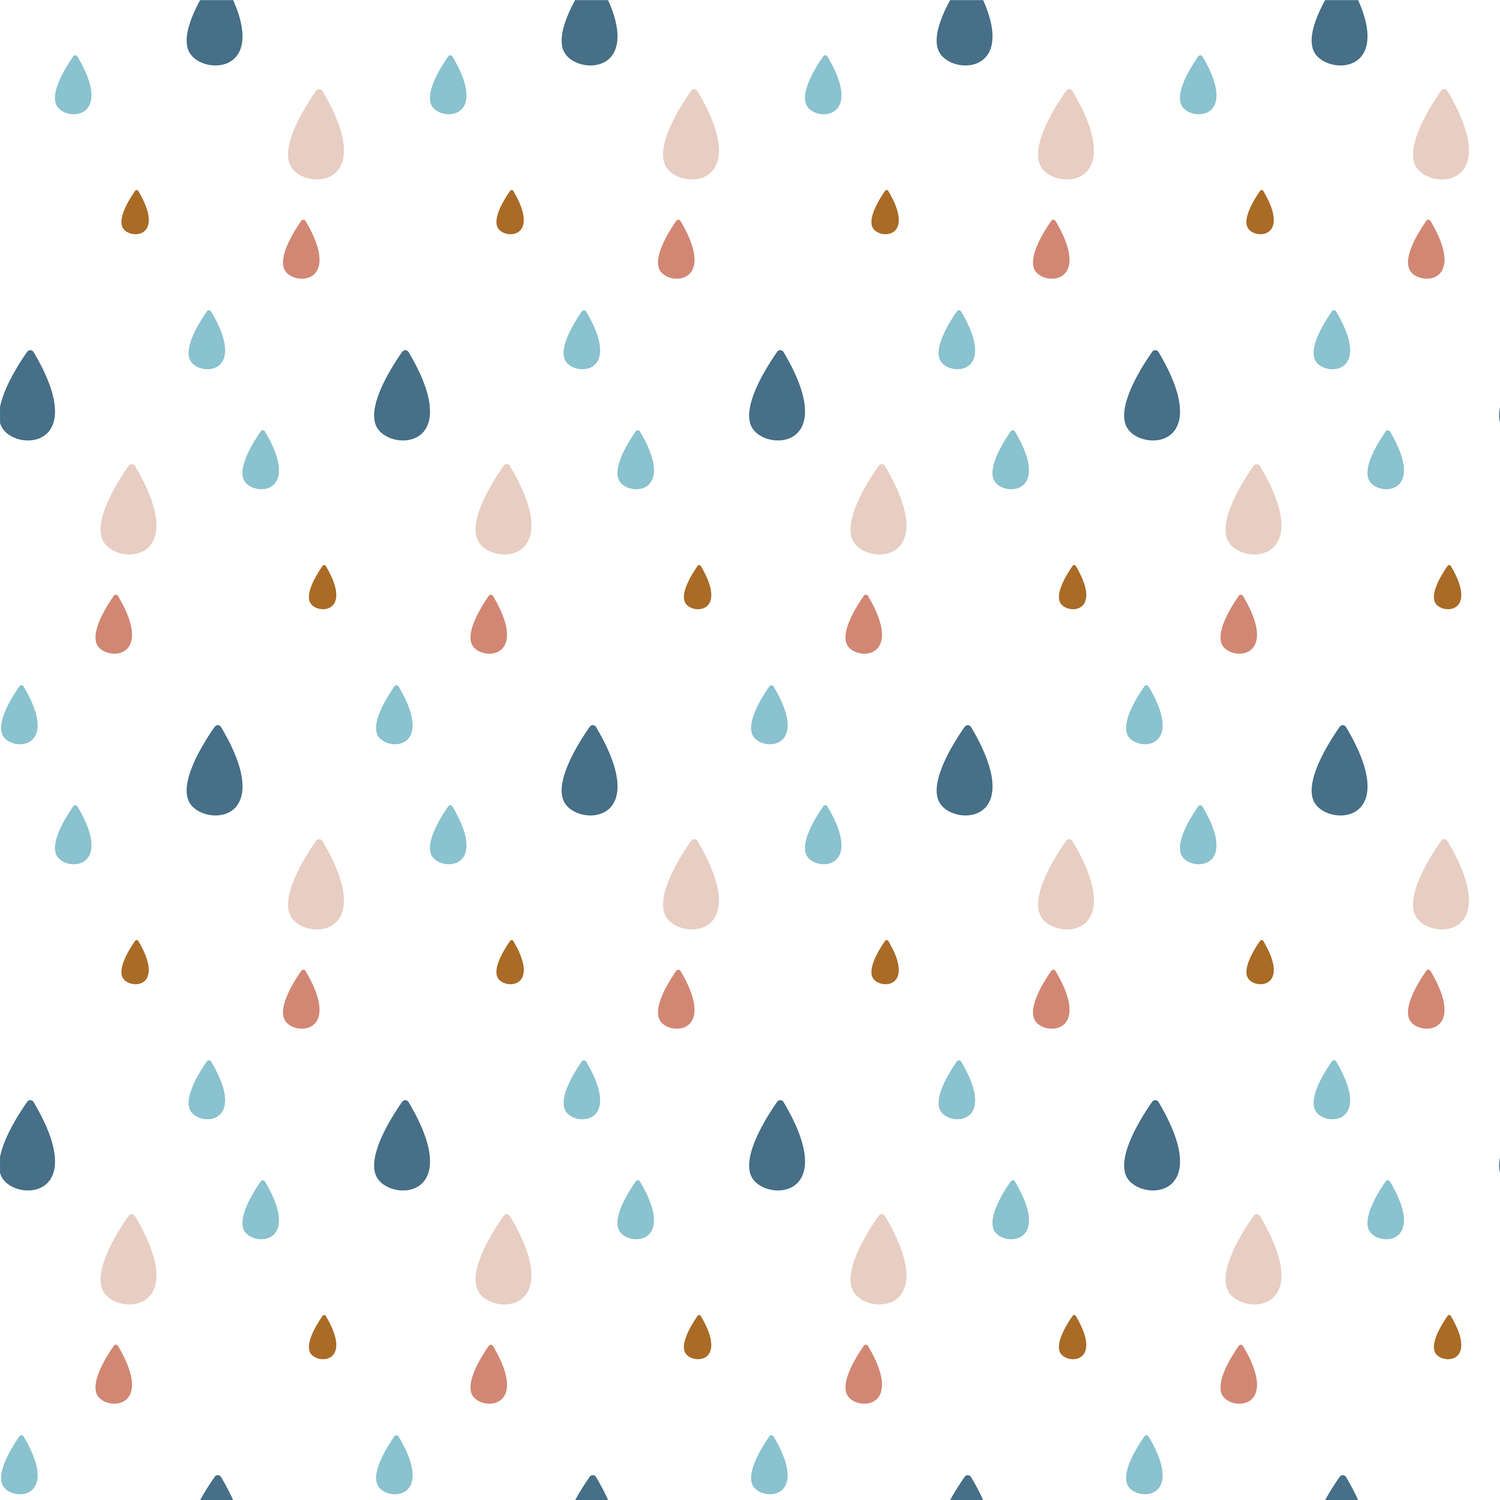             Children's Room Wallpaper with Colourful Water Drops - Textured non-woven
        